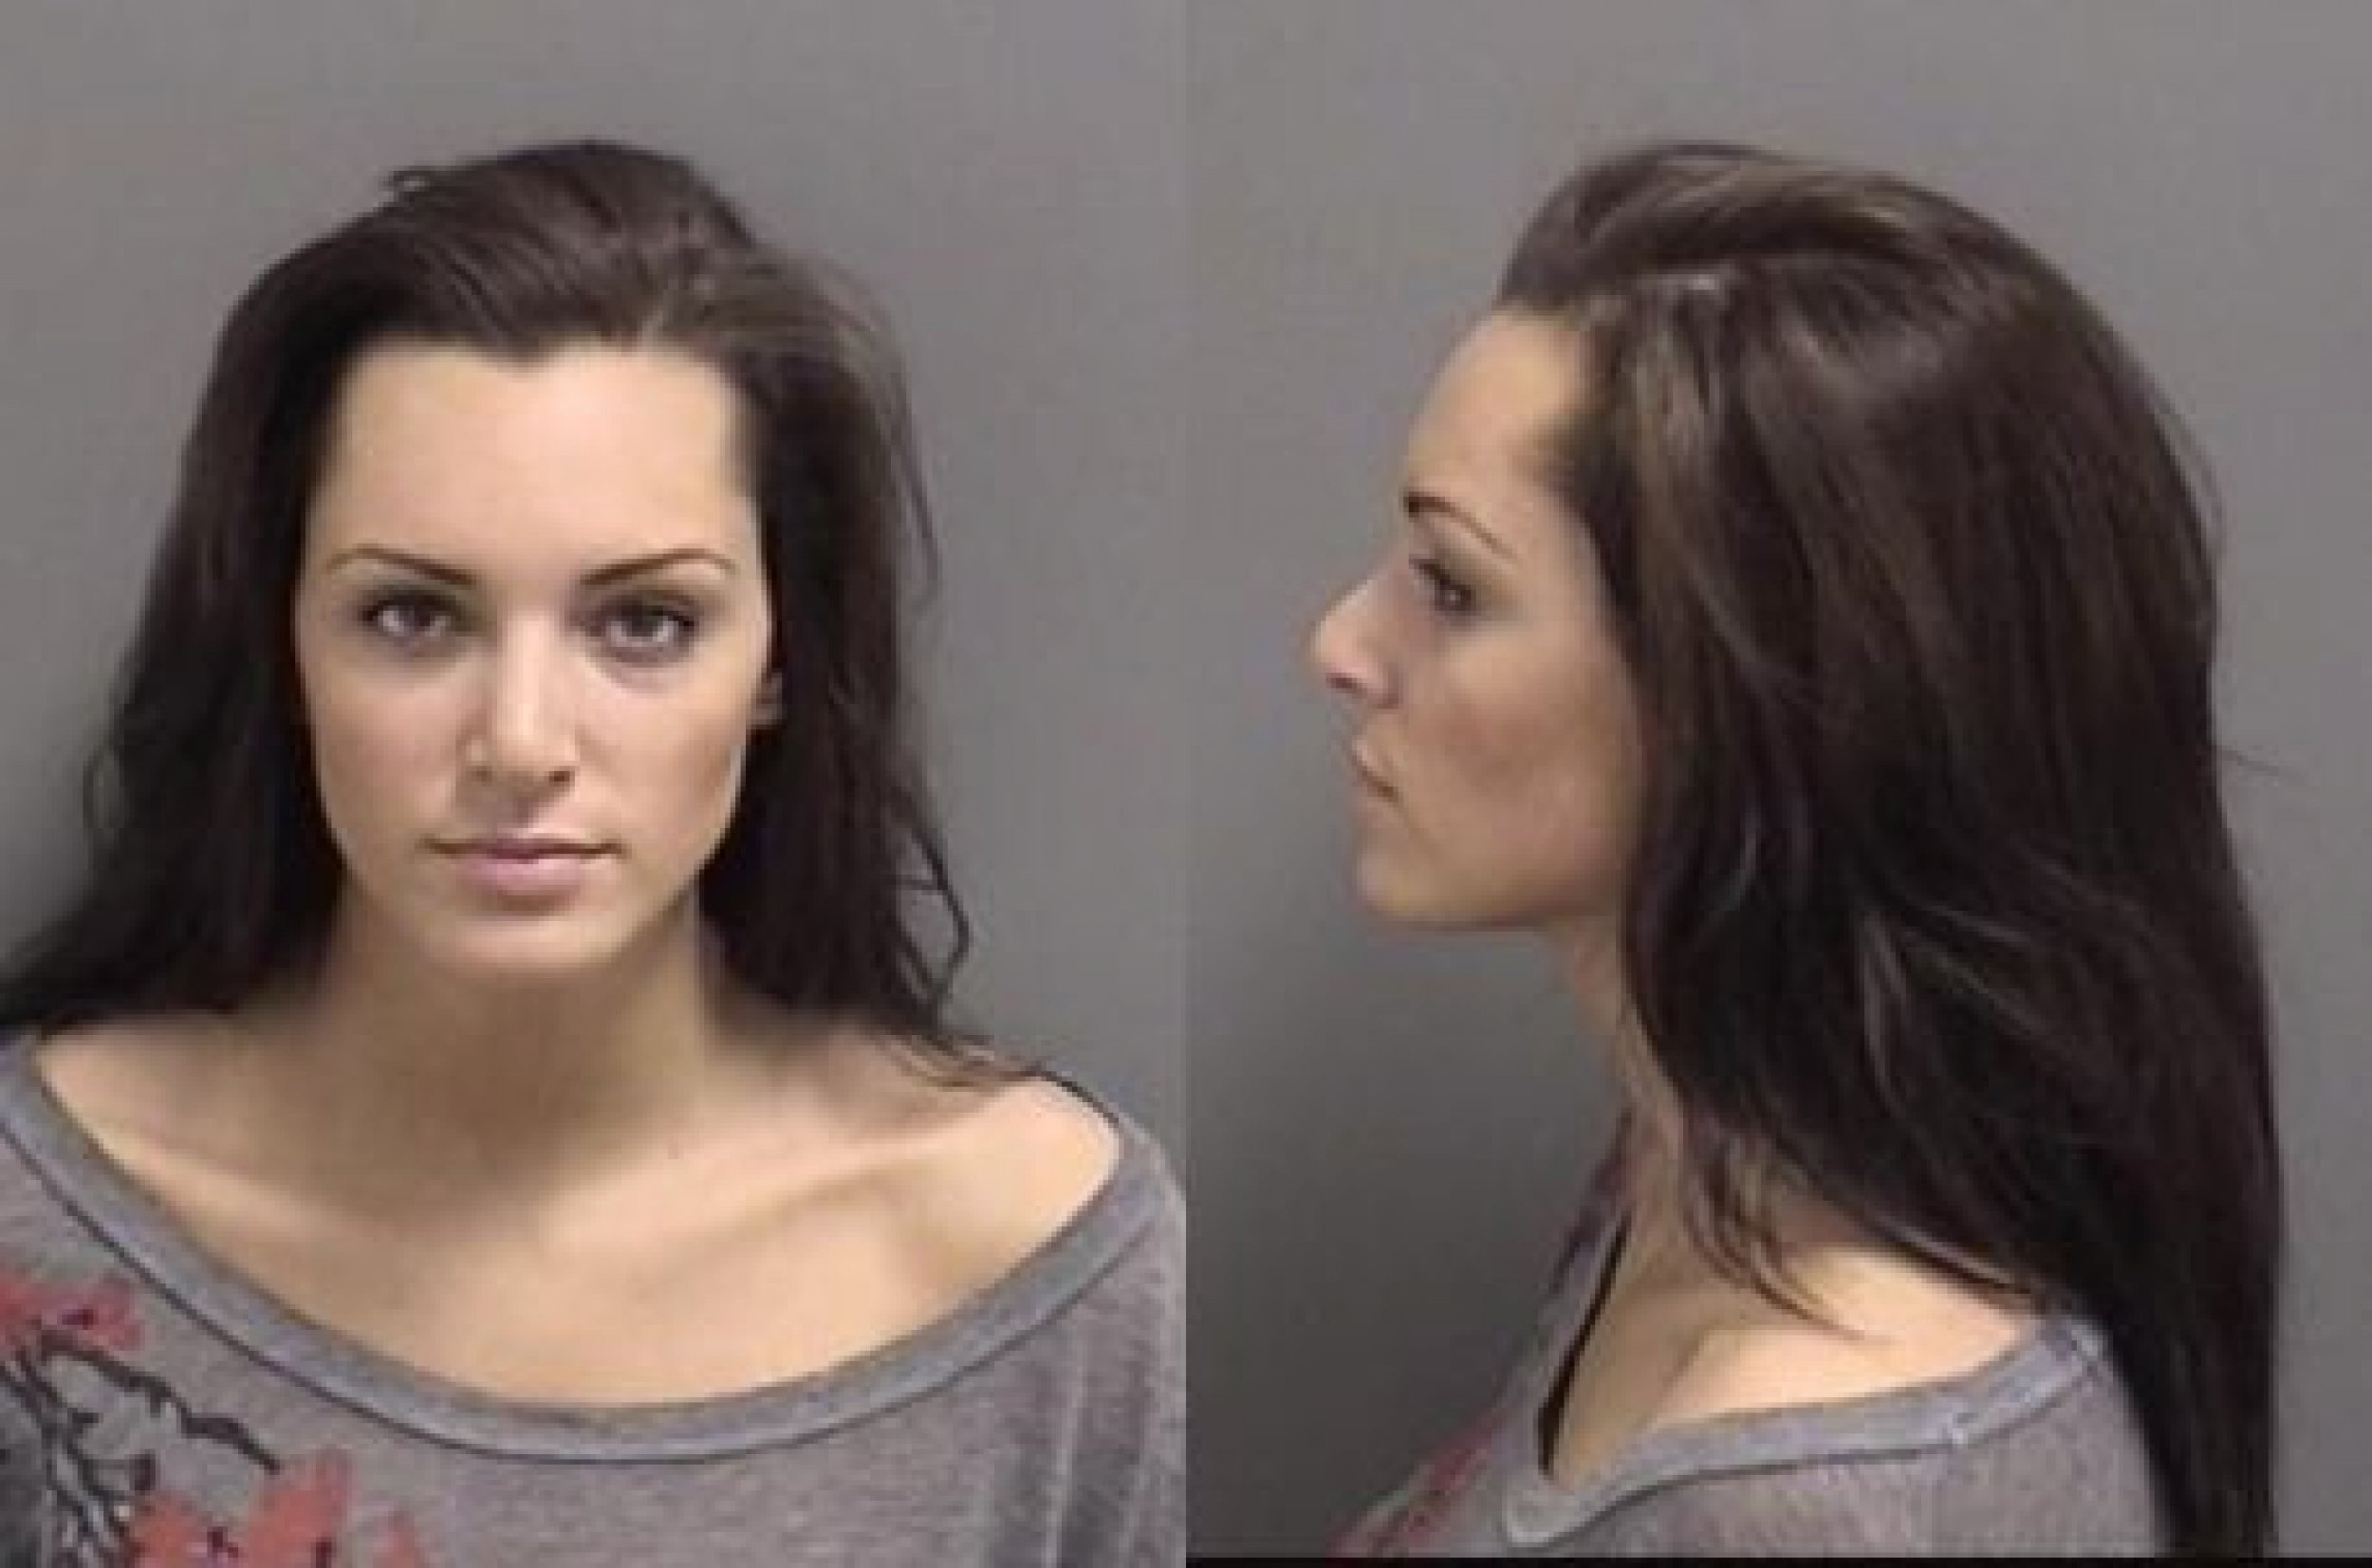 Stacie Juris Bottomless Photo And Arrest Resurface For Bad Girl Miss Illinois 2013 And Miss Usa